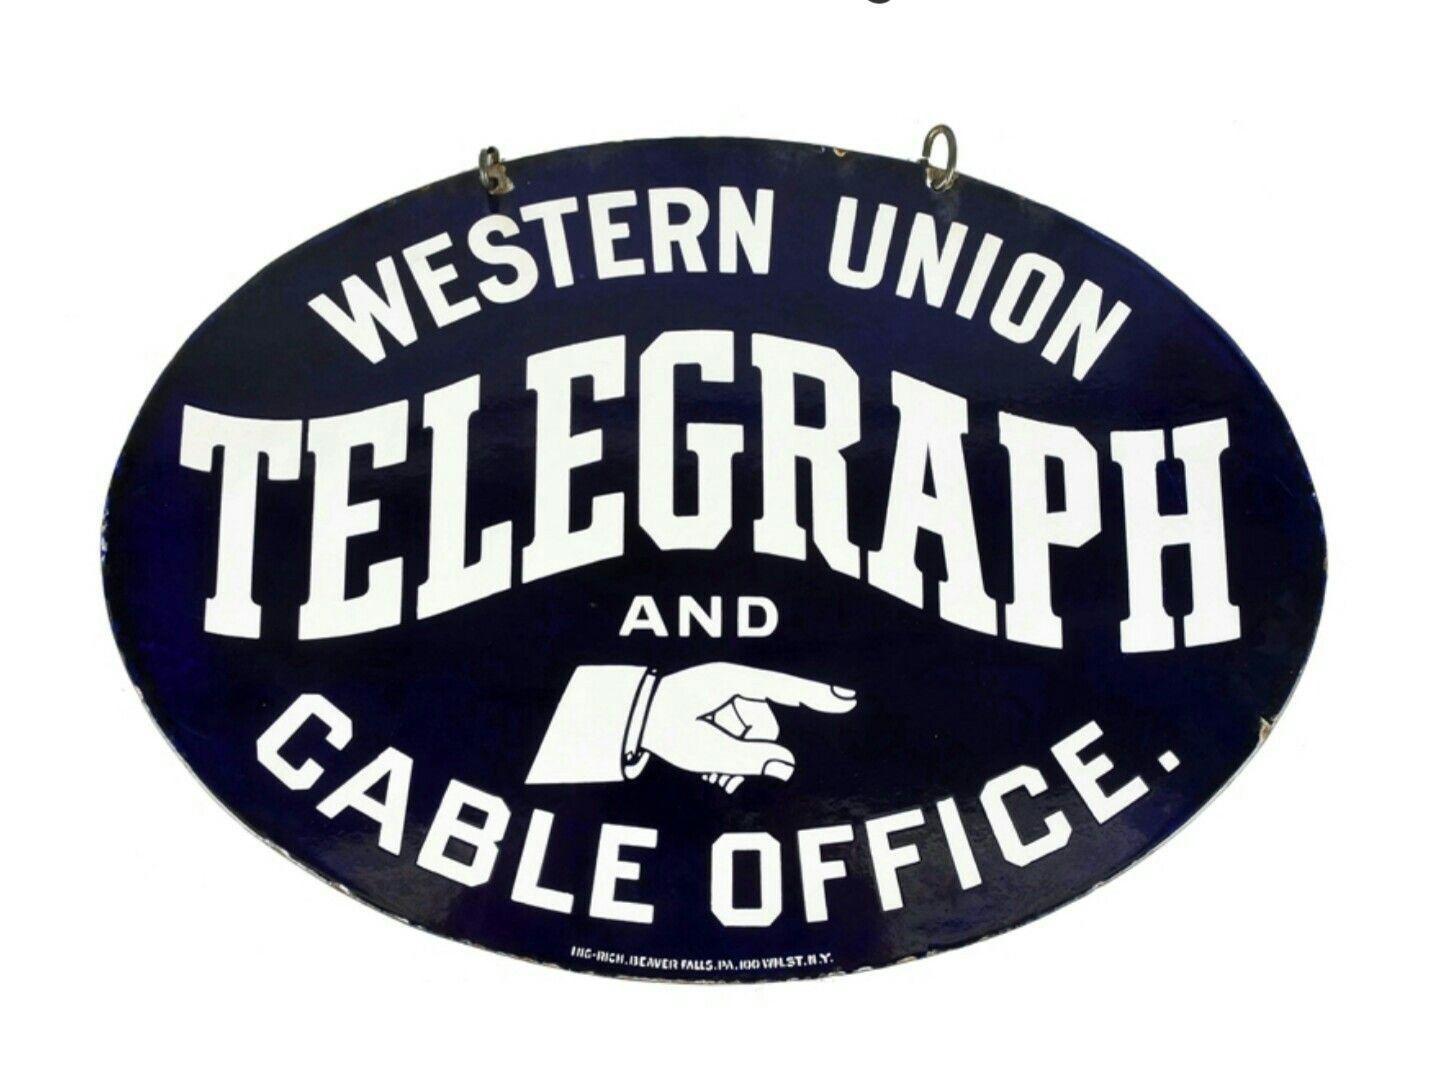 Old Western Union Logo - Rare Original Western Union Telegraph and Cable Office Porcelain